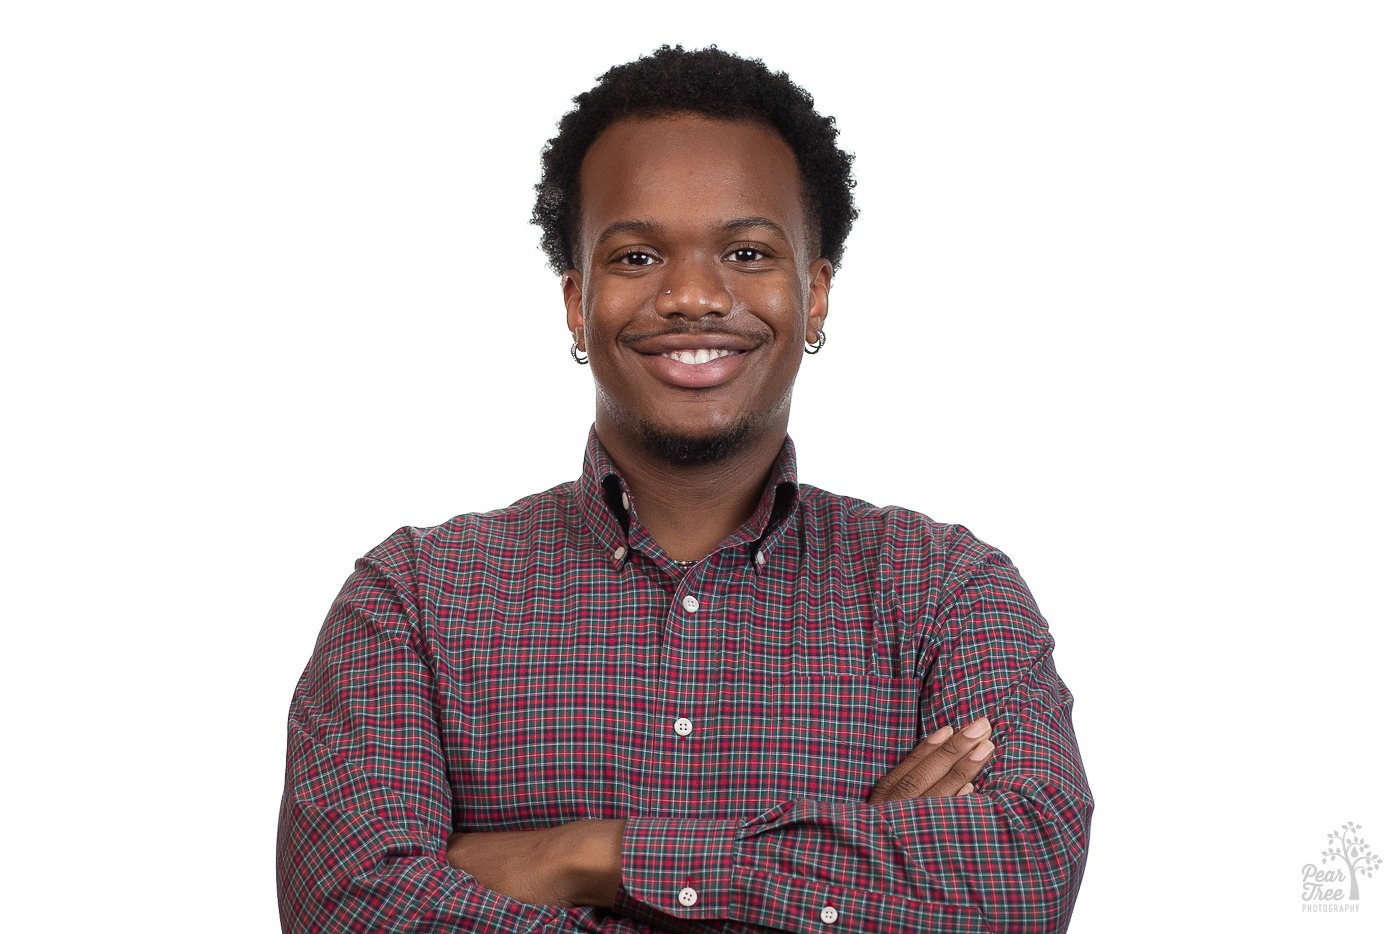 Attractive African American man wearing earrings and crossing his arms in a plaid button down shirt while smiling for a professional headshot in front of a white background